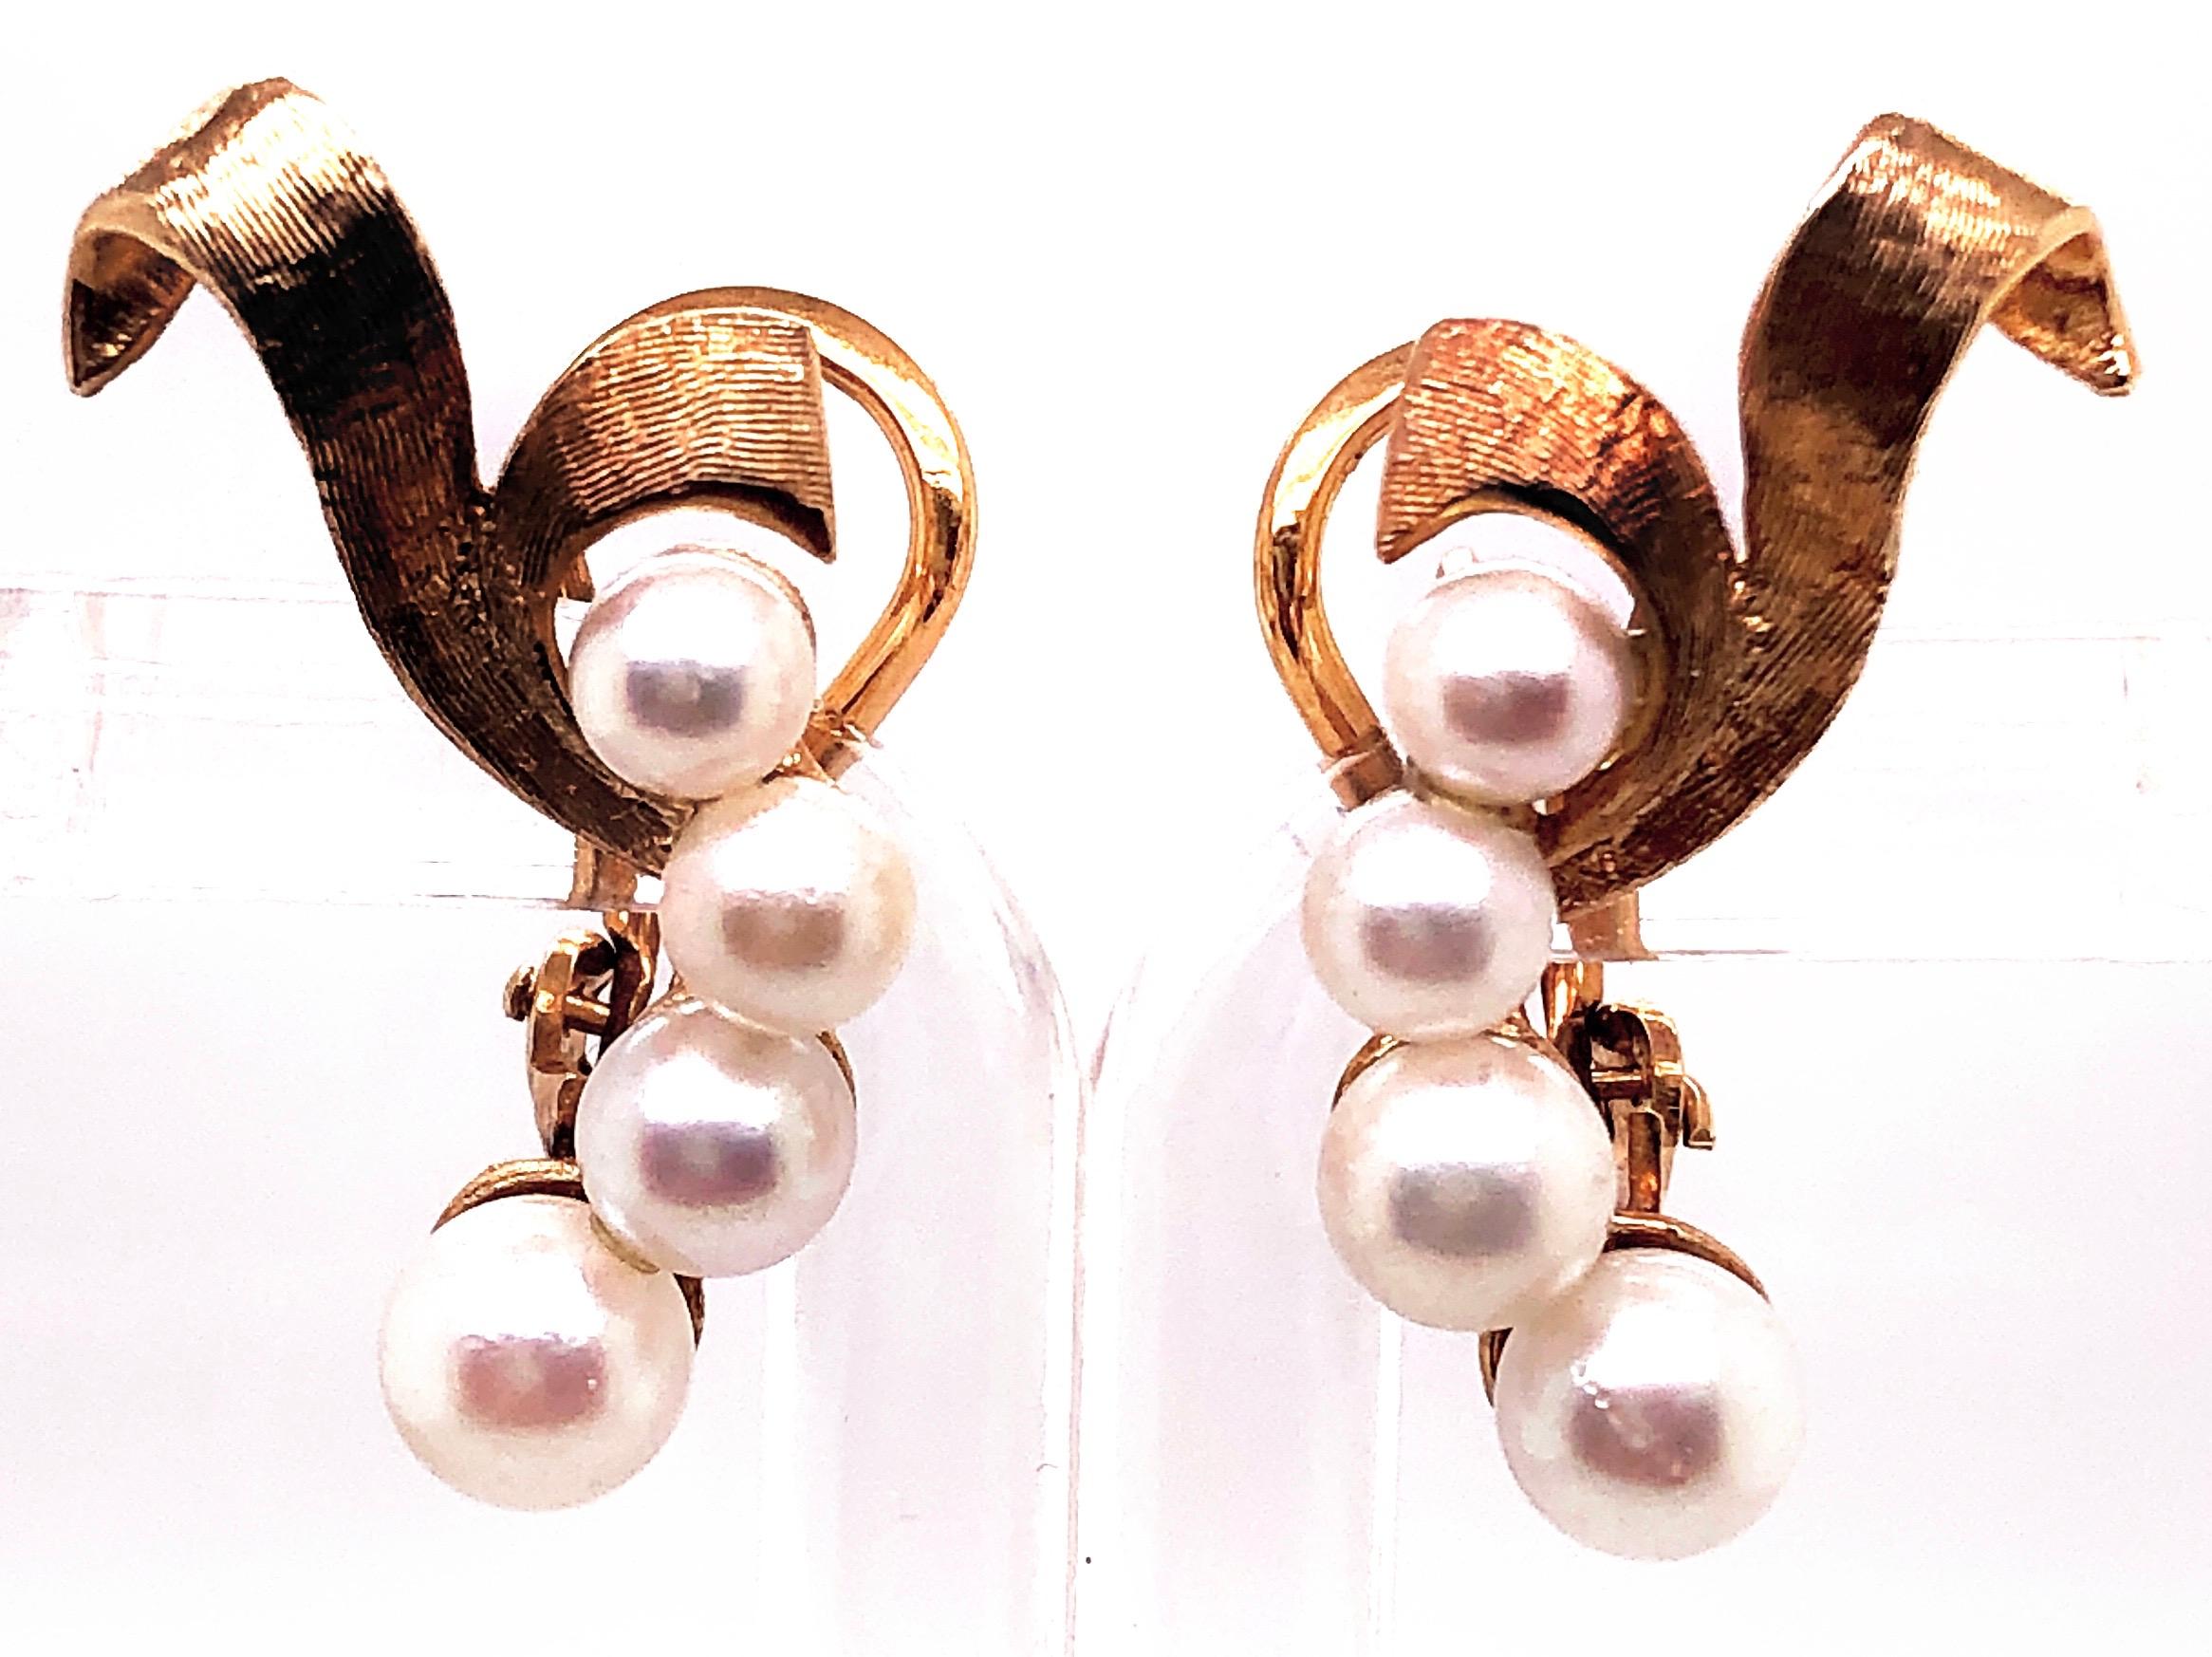 14 Karat Yellow Gold Four Pearl Drop Earrings With English Locks
6 grams total weight.